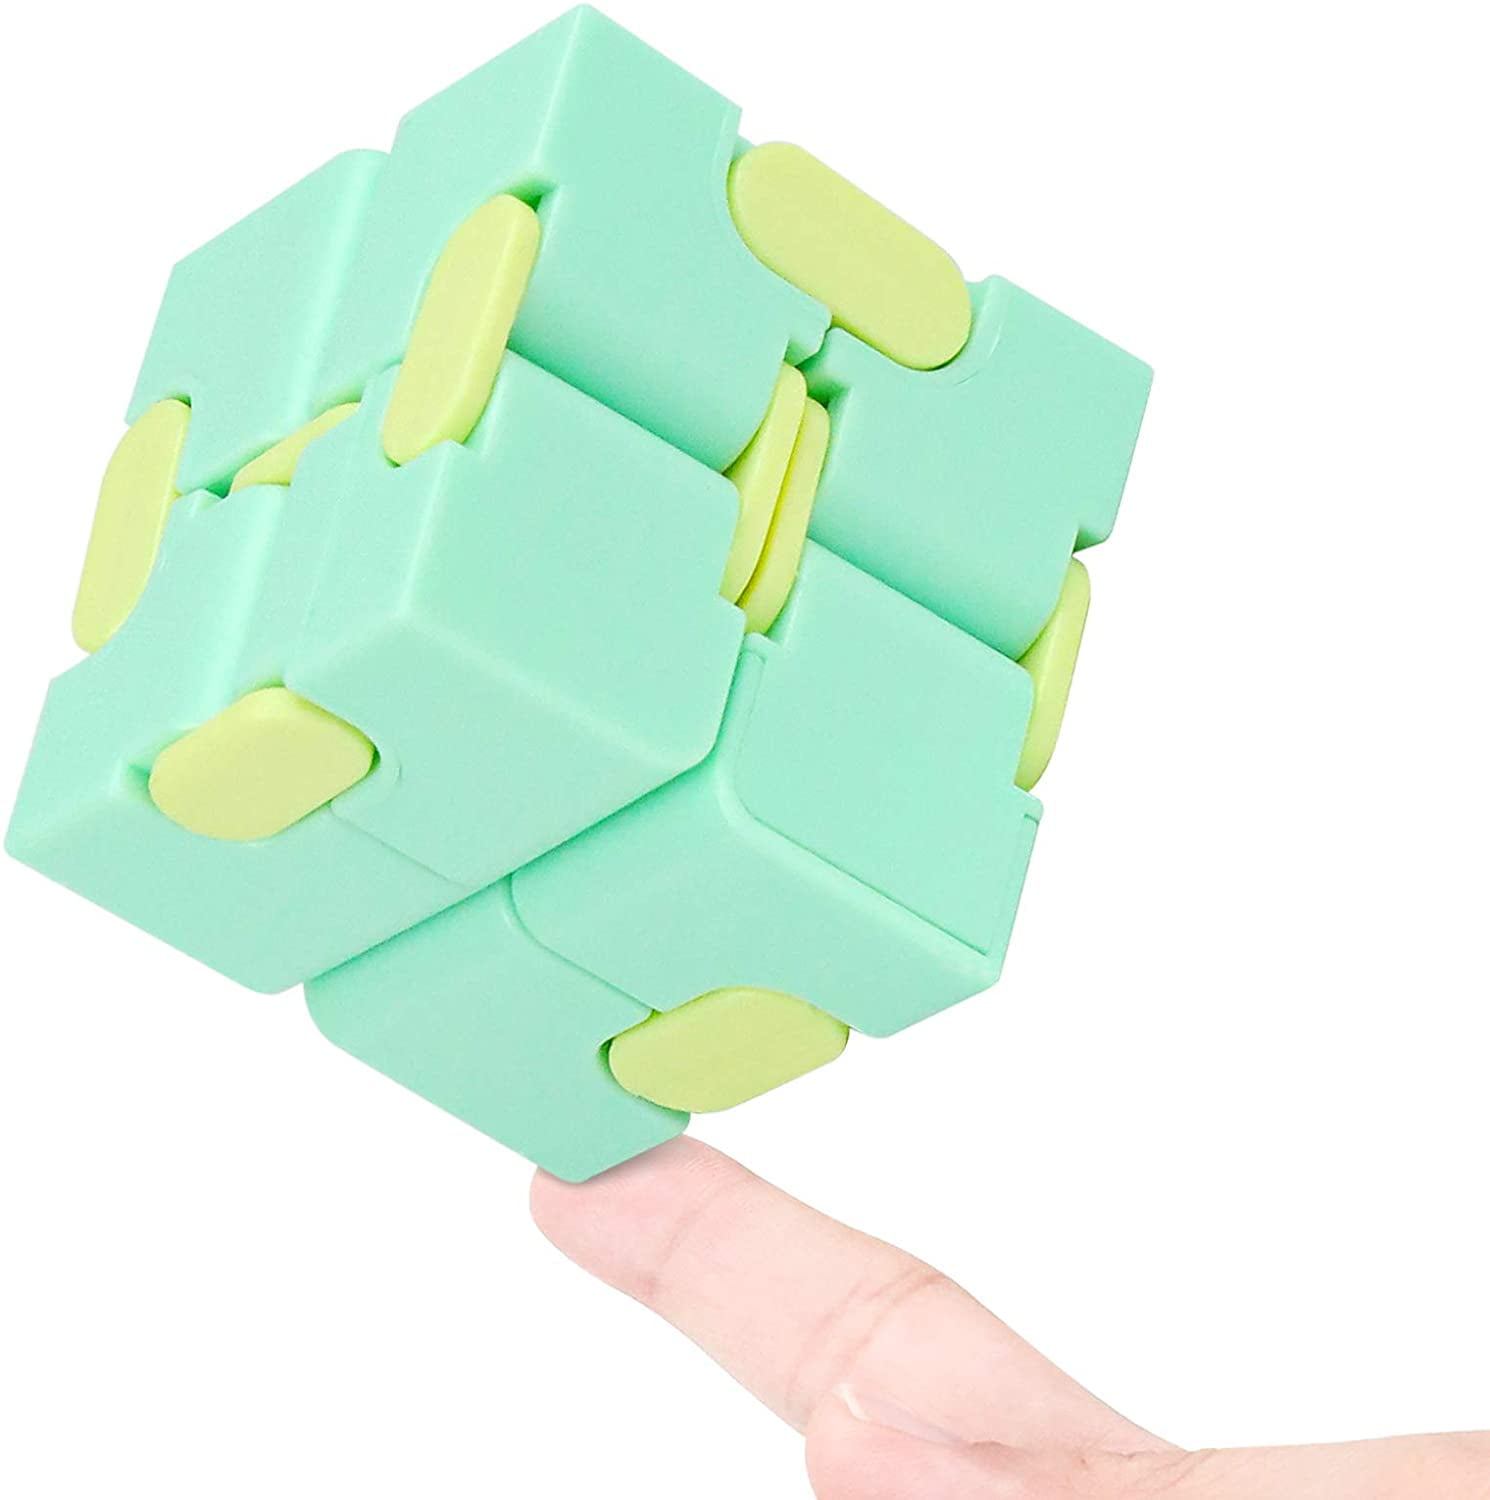 Black Puzzle Cube Hand Wrist Twister Toys for Stress Relief Fidget Anti Anxiety Stress Spending Time for Teens Adult RH Trading Infinity Cube 3D Fidgeting Game Fidget Toy Mini Fidget Finger Toy